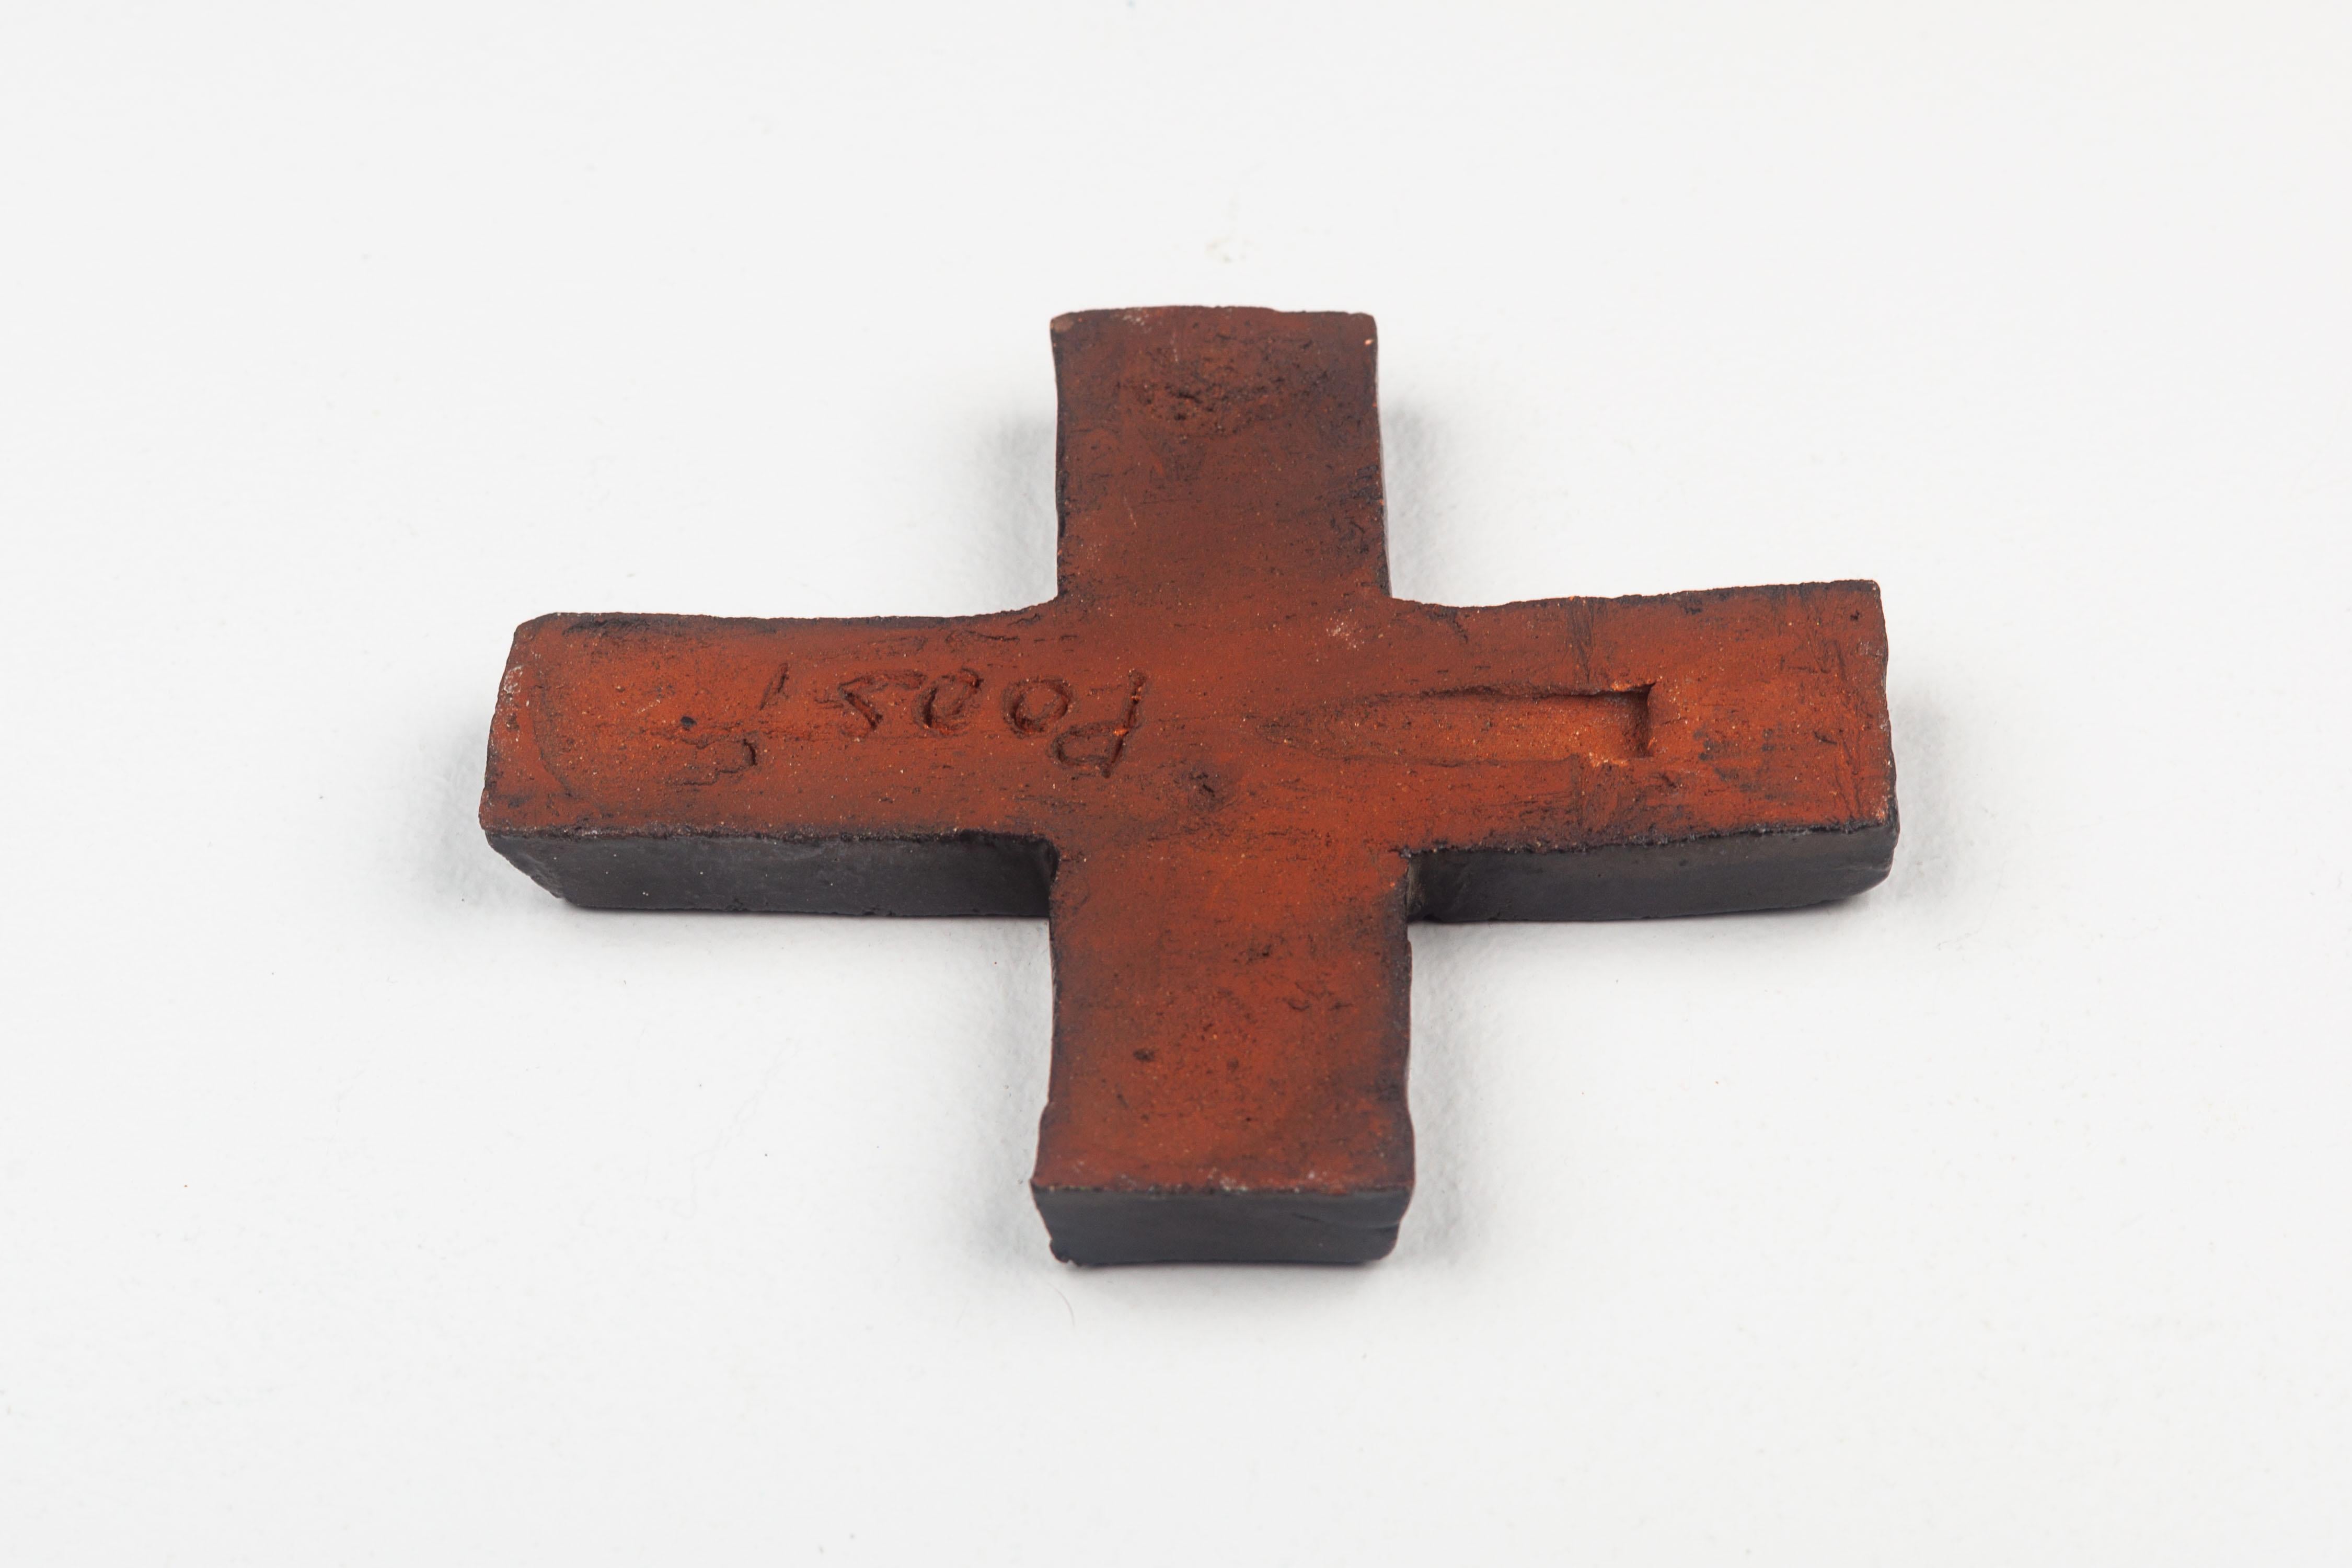 This ceramic crucifix is a quintessential representation of mid-century modern artistry, characterized by its sleek lines and the juxtaposition of muted tones. Handcrafted by a European studio pottery artist, the piece stands out for its textural